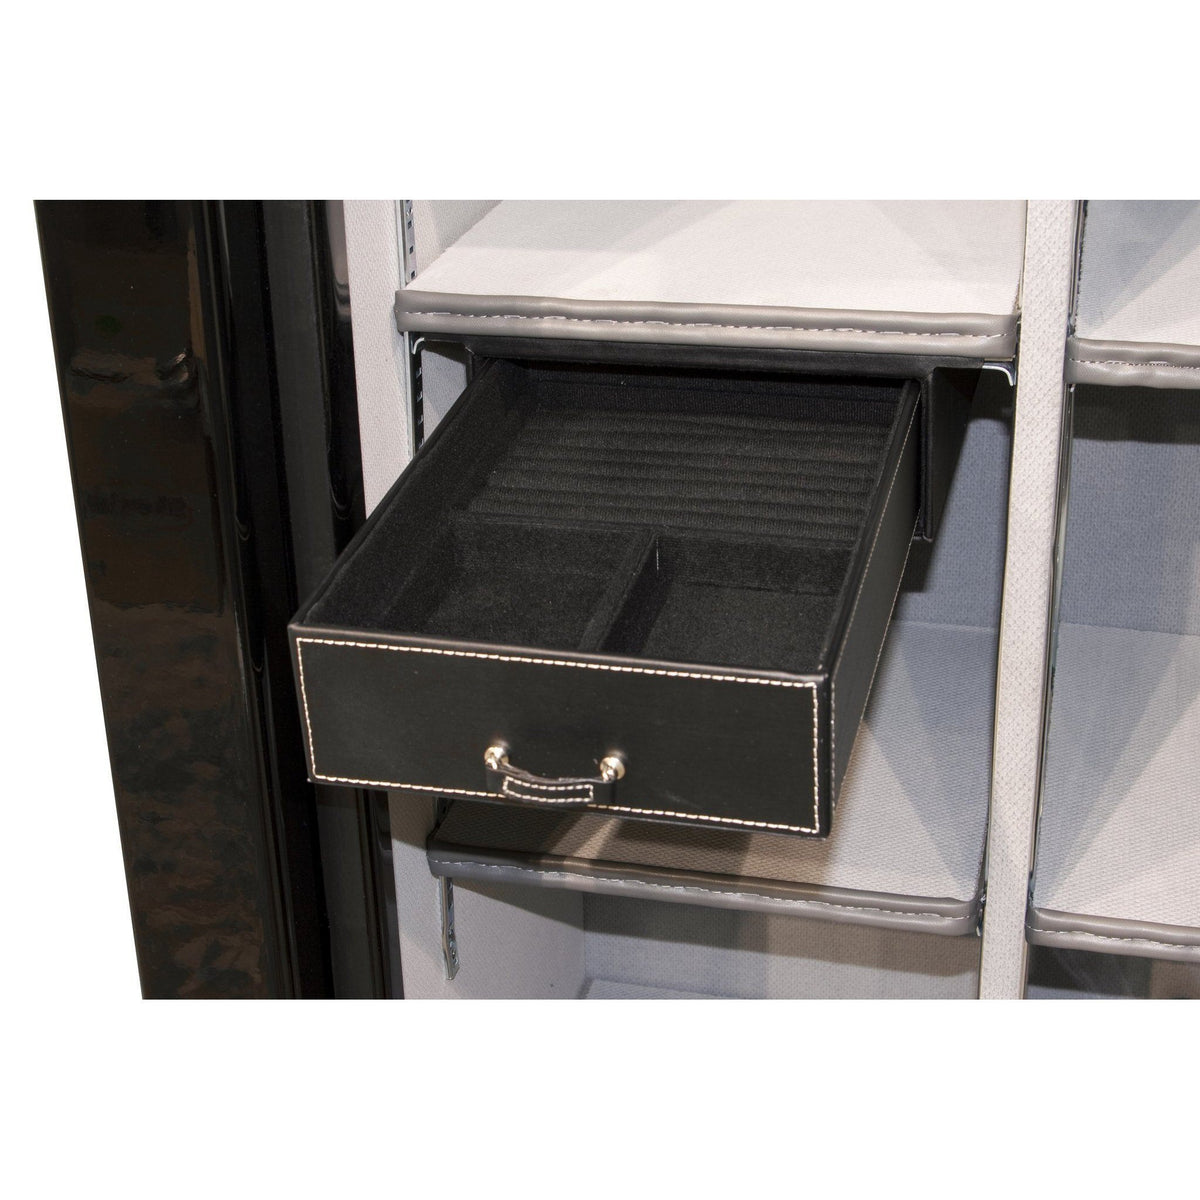 Accessory - Storage - Jewelry Drawer - 8.5 inch - under shelf mount - 23-50 size safes | Liberty Safe Norcal.